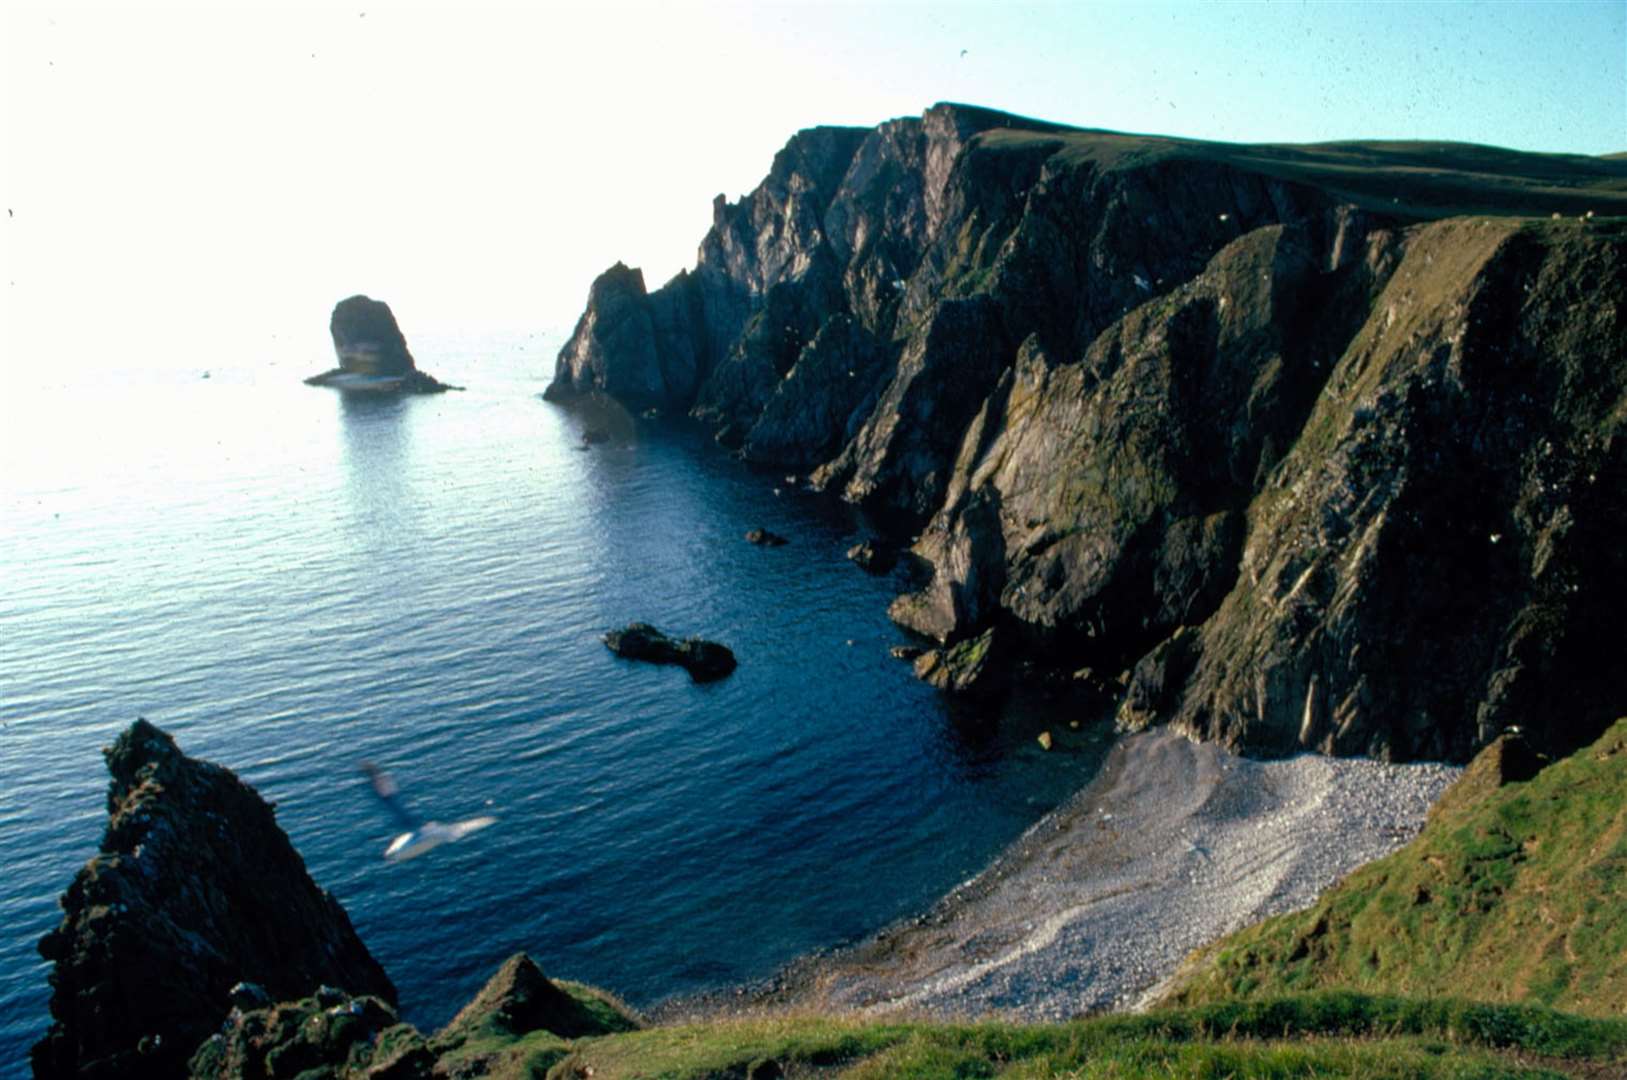 Fair isle is one of the areas looked after by the NTS.